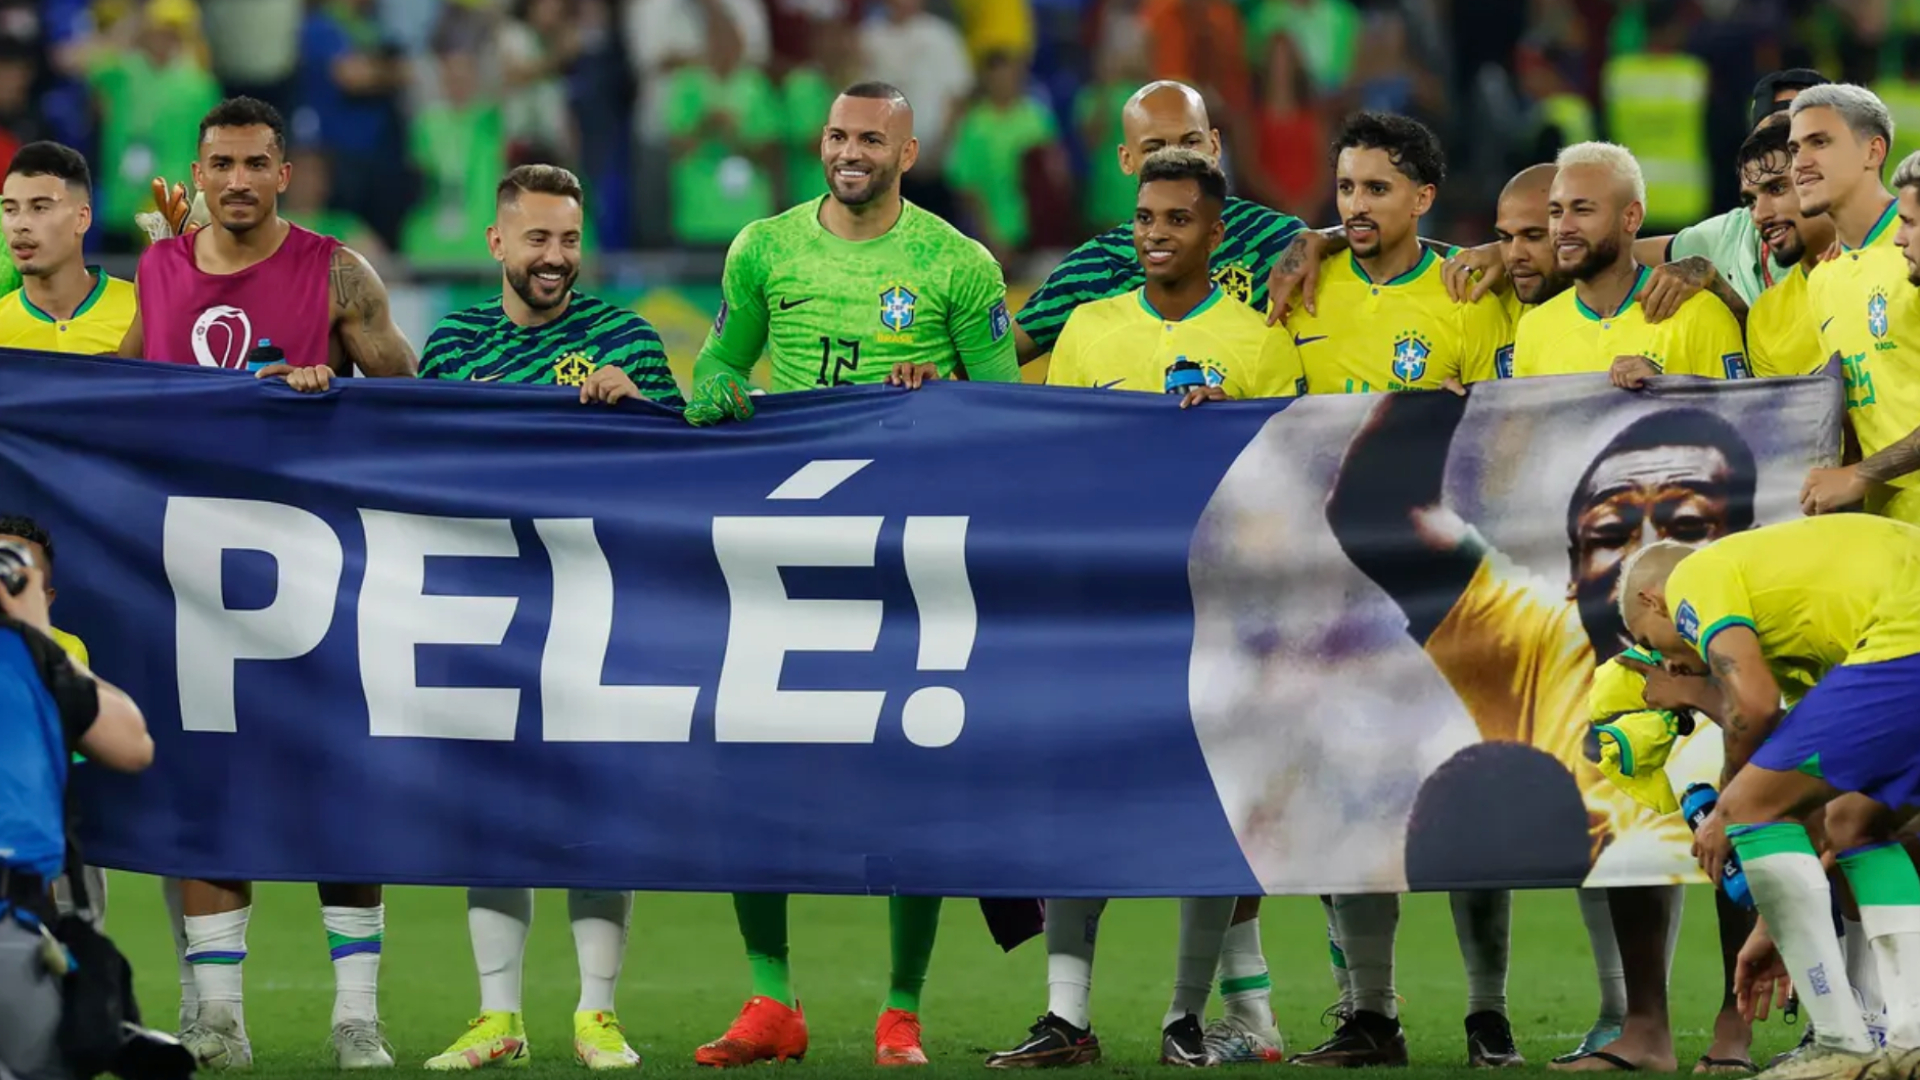 Brazil salutes Pelé after 4-1 win against Korea in FIFA World Cup